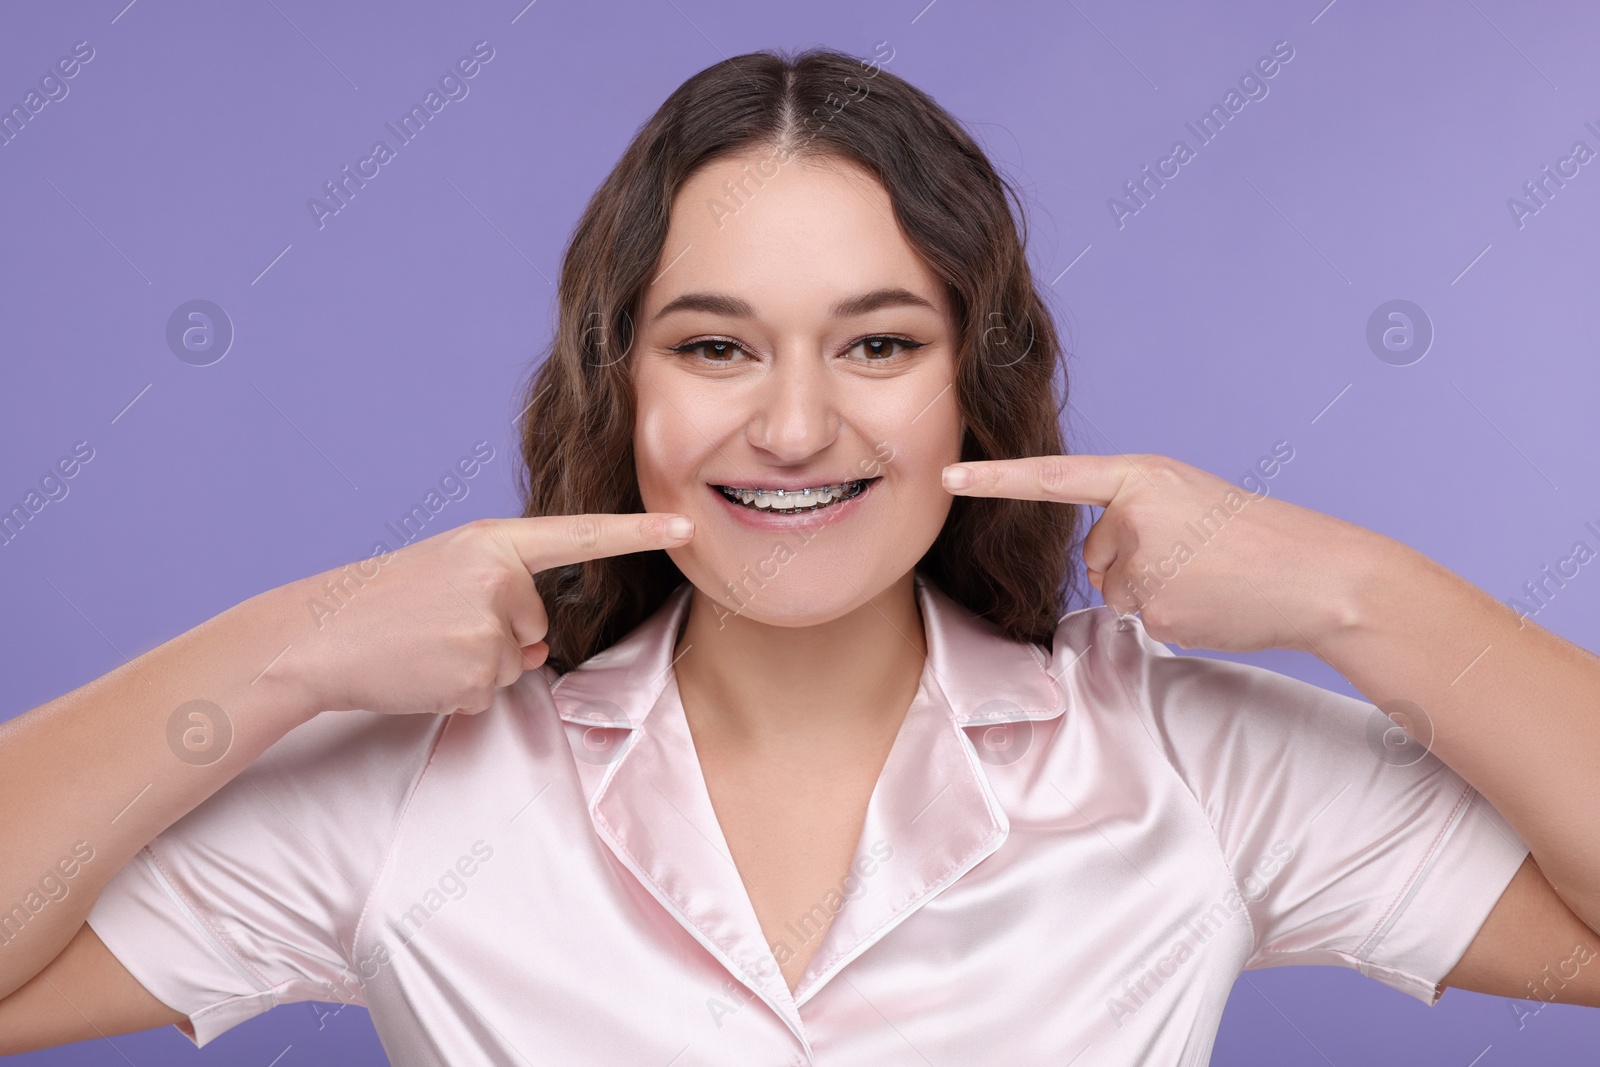 Photo of Smiling woman pointing at braces on her teeth against violet background